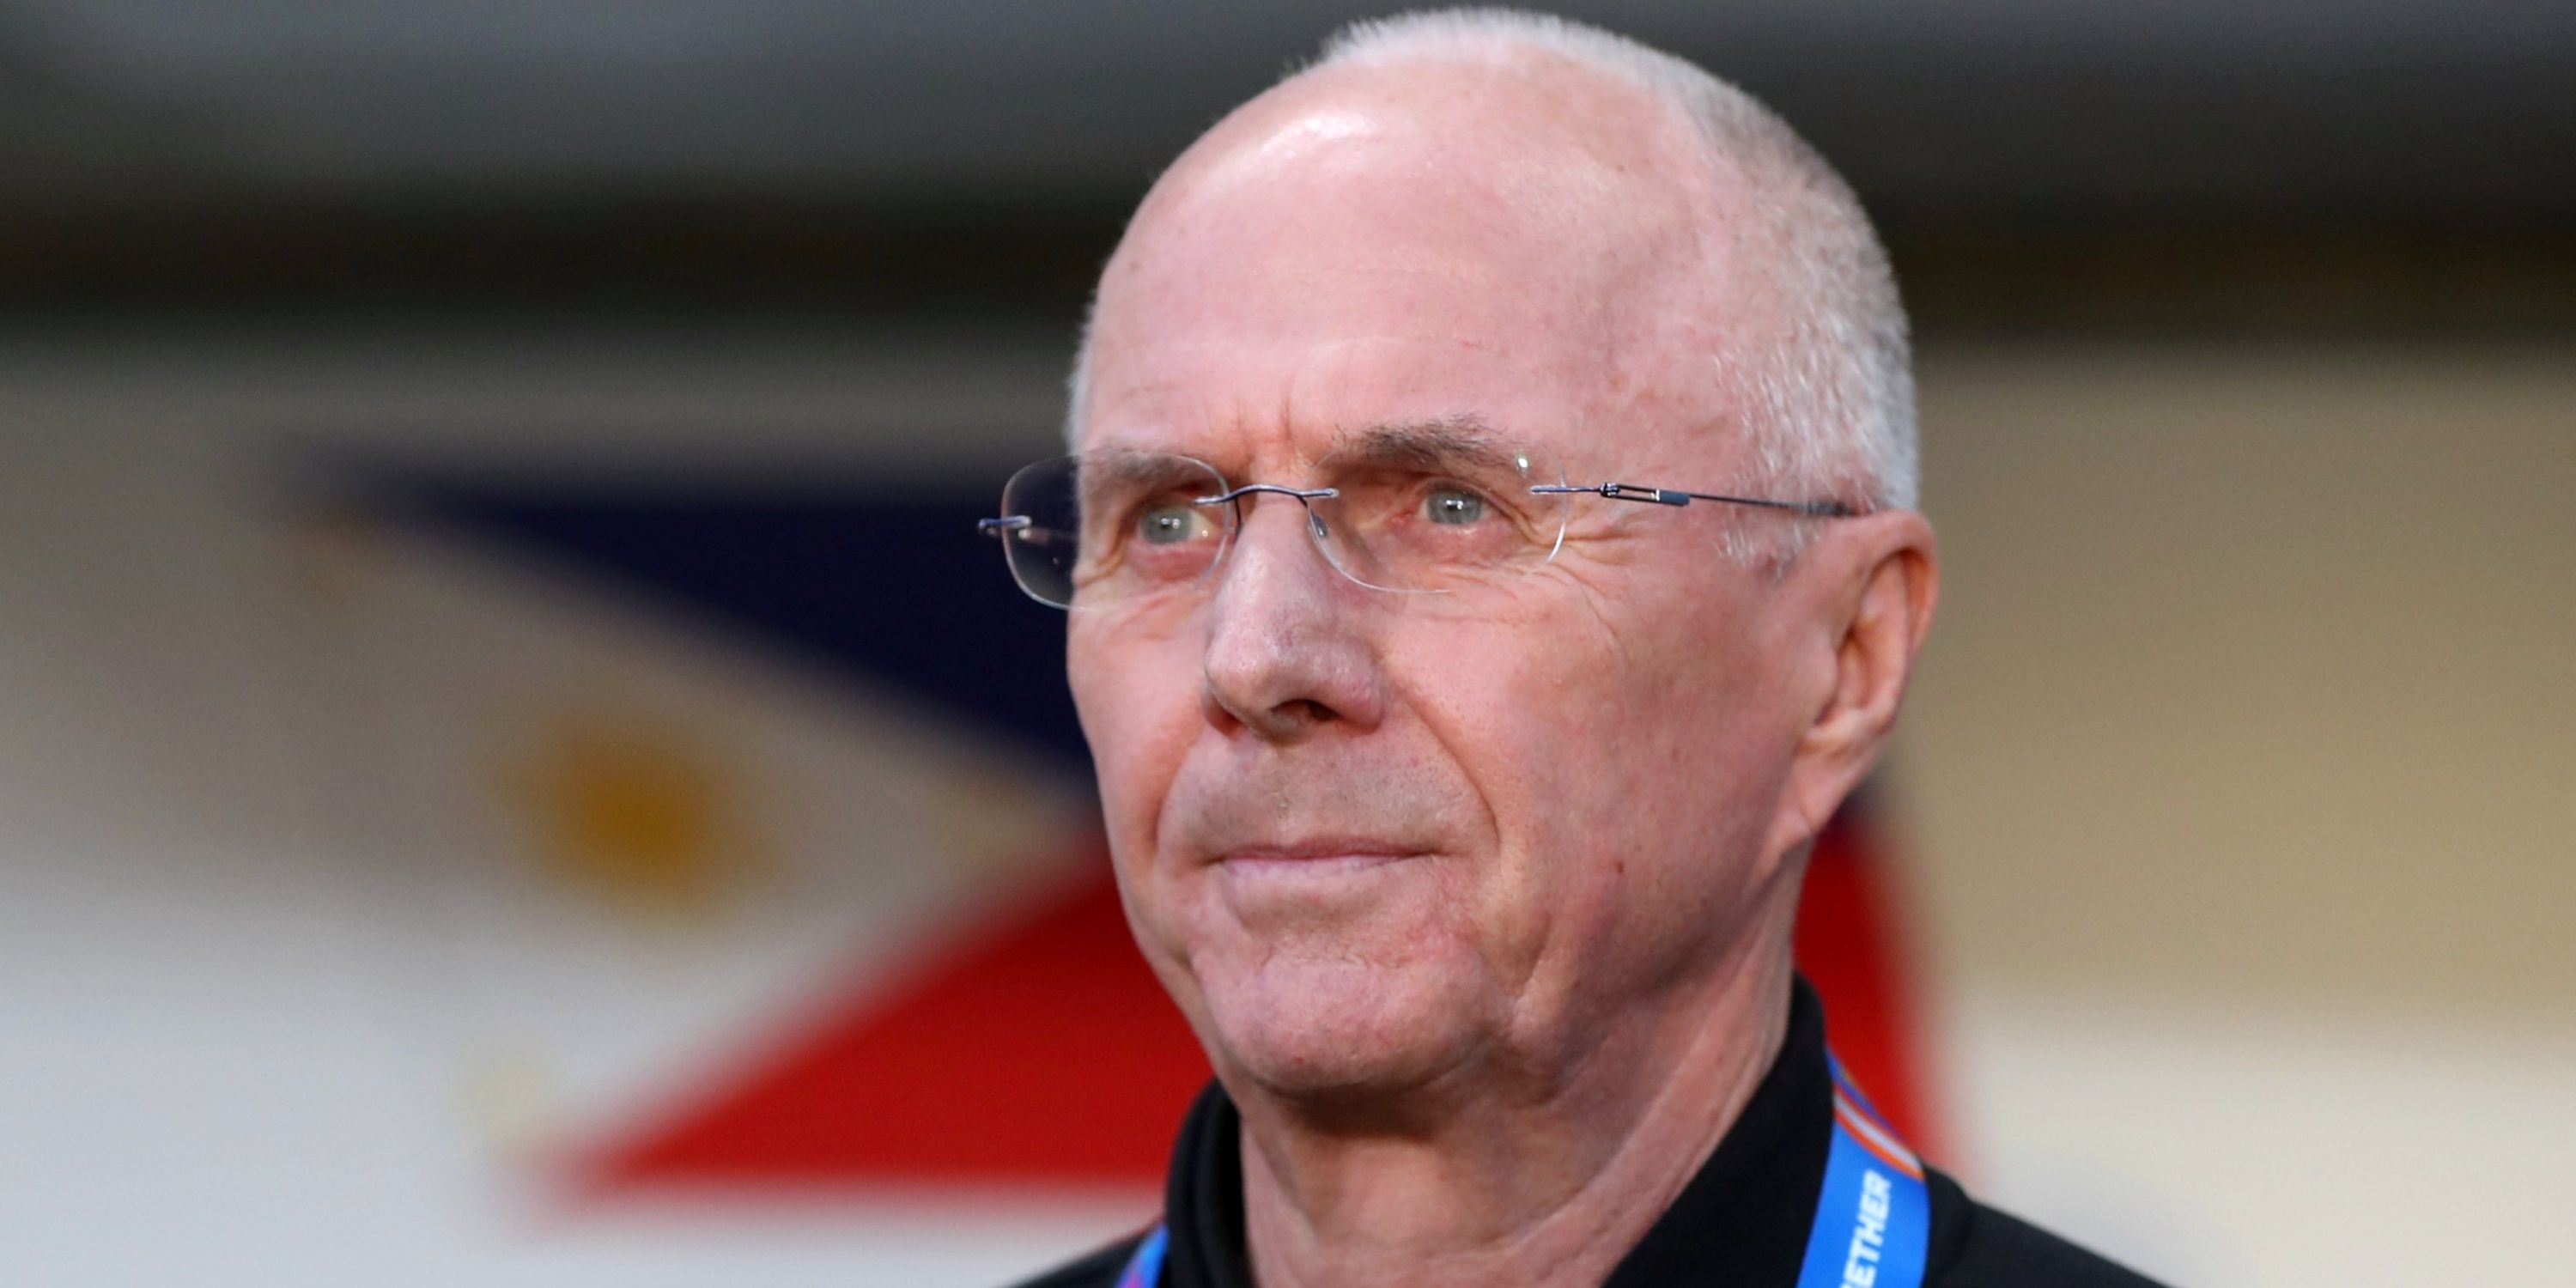 Sven-Goran Eriksson reveals he has cancer and has ‘at best a year to live’